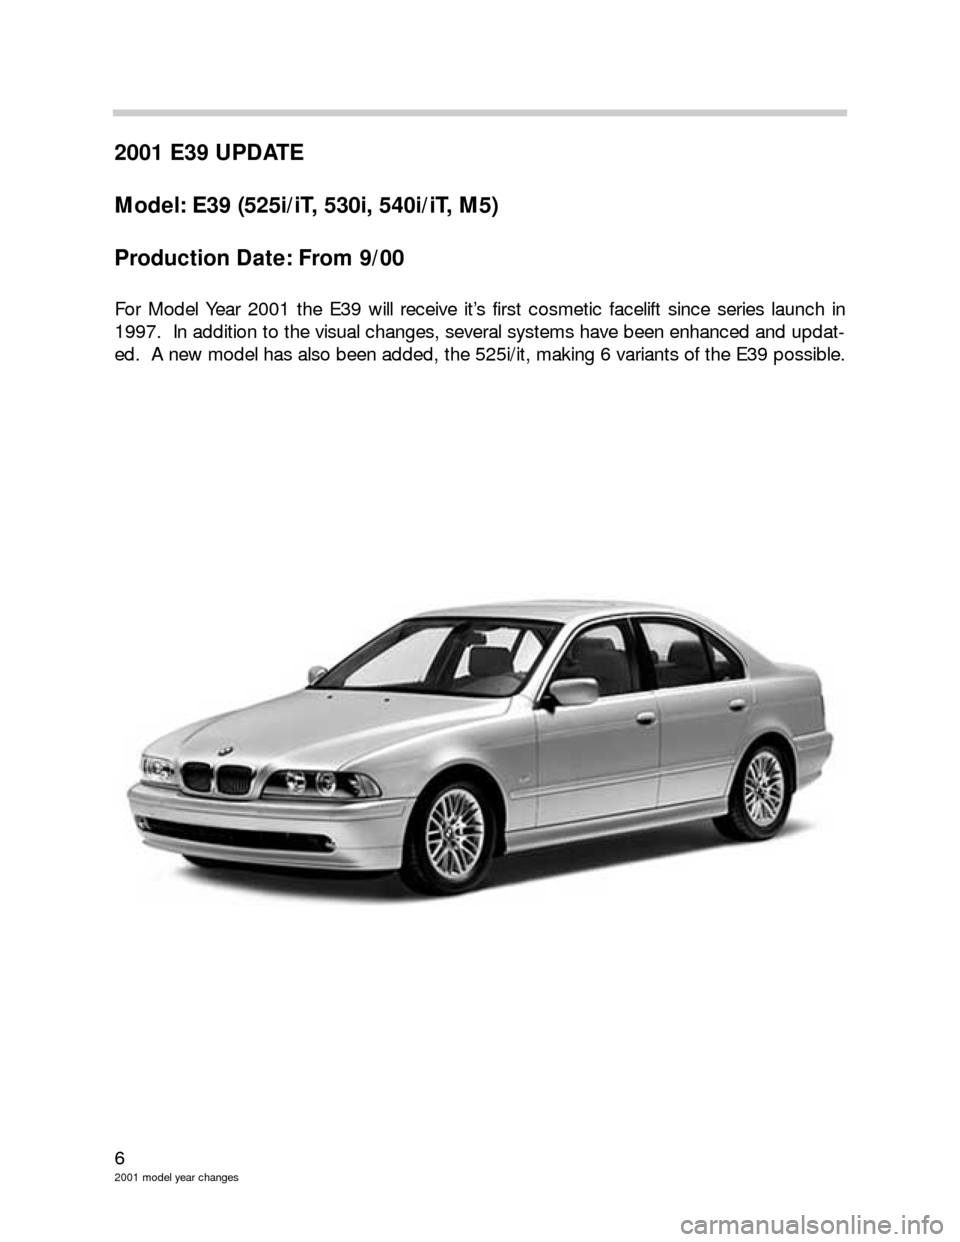 BMW 3 SERIES 2003 E46 Model Yar Changes 6
2001 model year changes
2001 E39 UPDATE
Model: E39 (525i/iT, 530i, 540i/iT, M5)
Production Date: From 9/00
For Model Year 2001 the E39 will receive it’s first cosmetic facelift since series launch